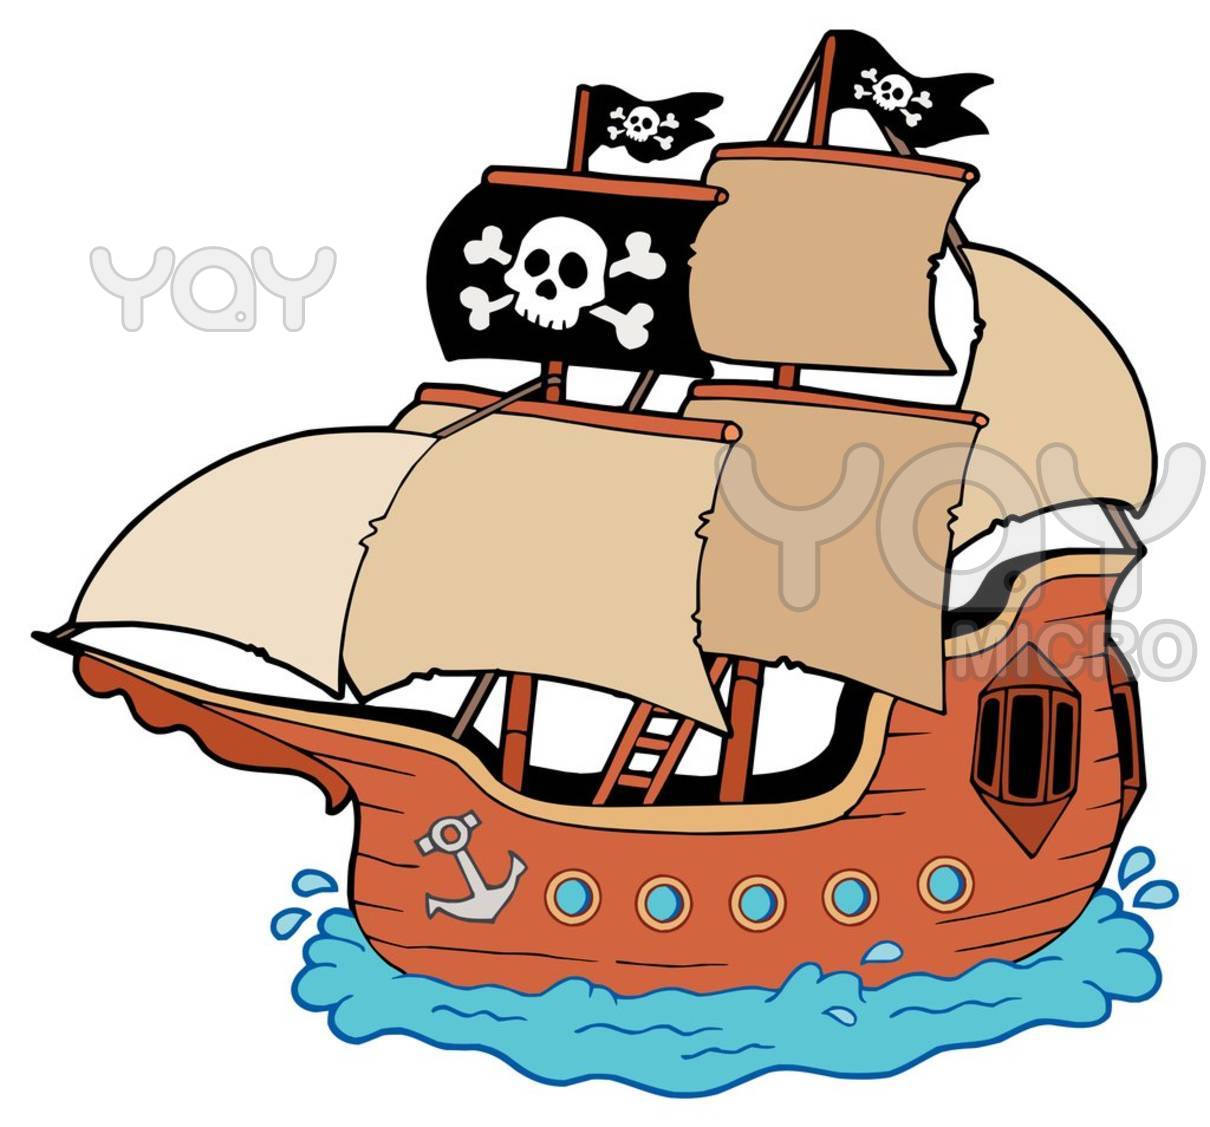 free clipart images pirates - photo #41